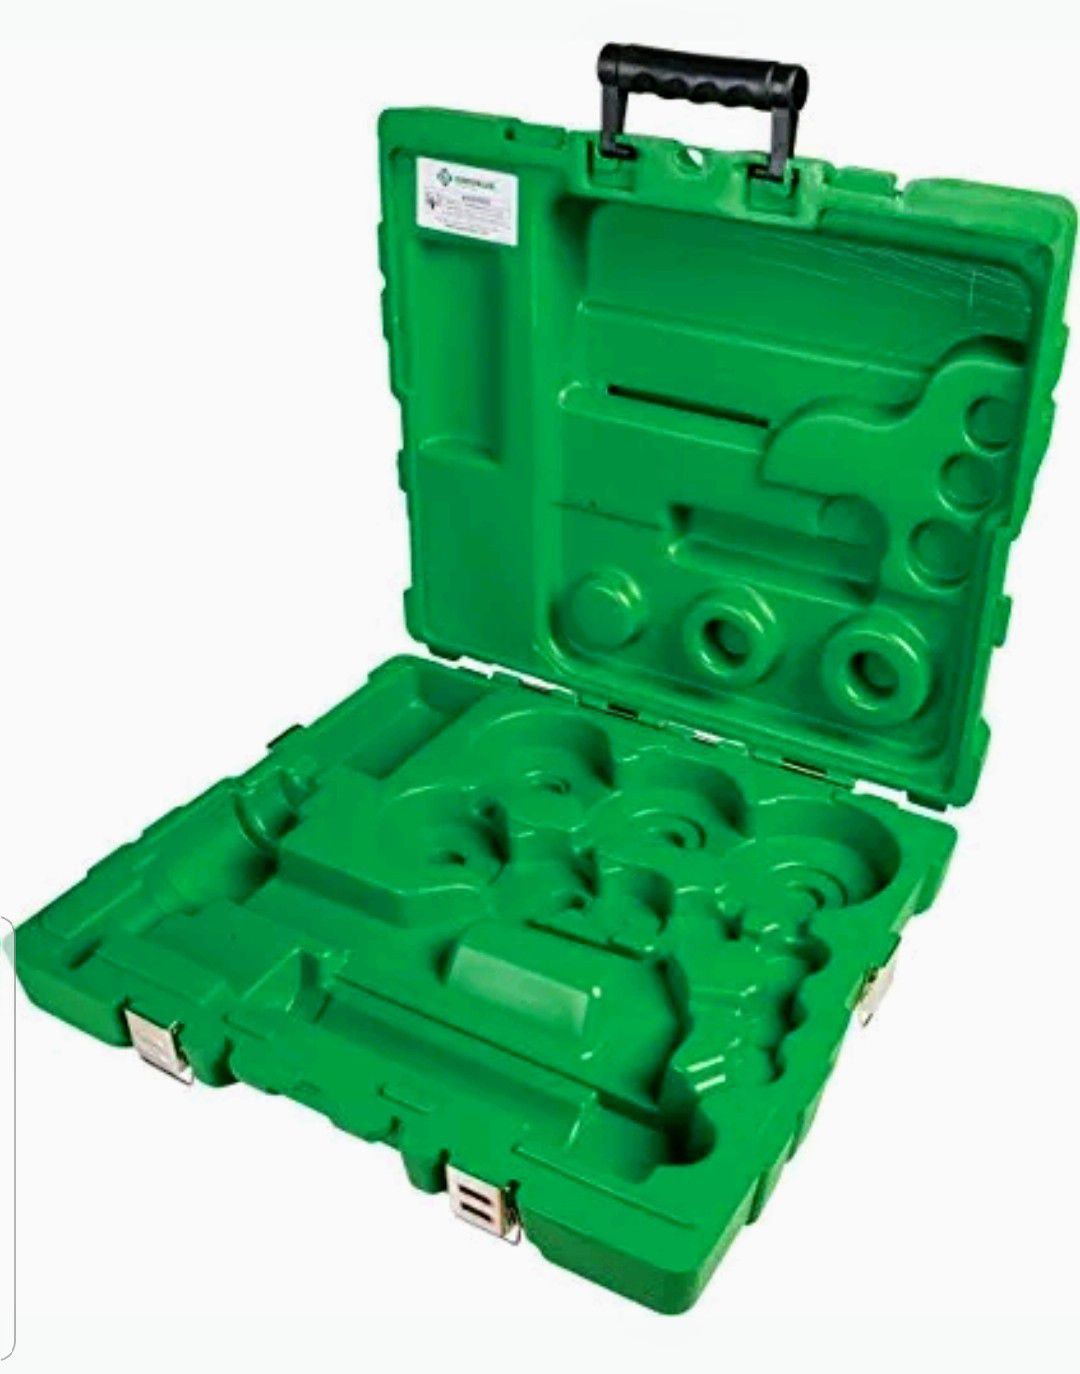 Brand New Greenlee Case (05387/Blow Molded Case) for a 7310SB Hydraulic Knockout Set